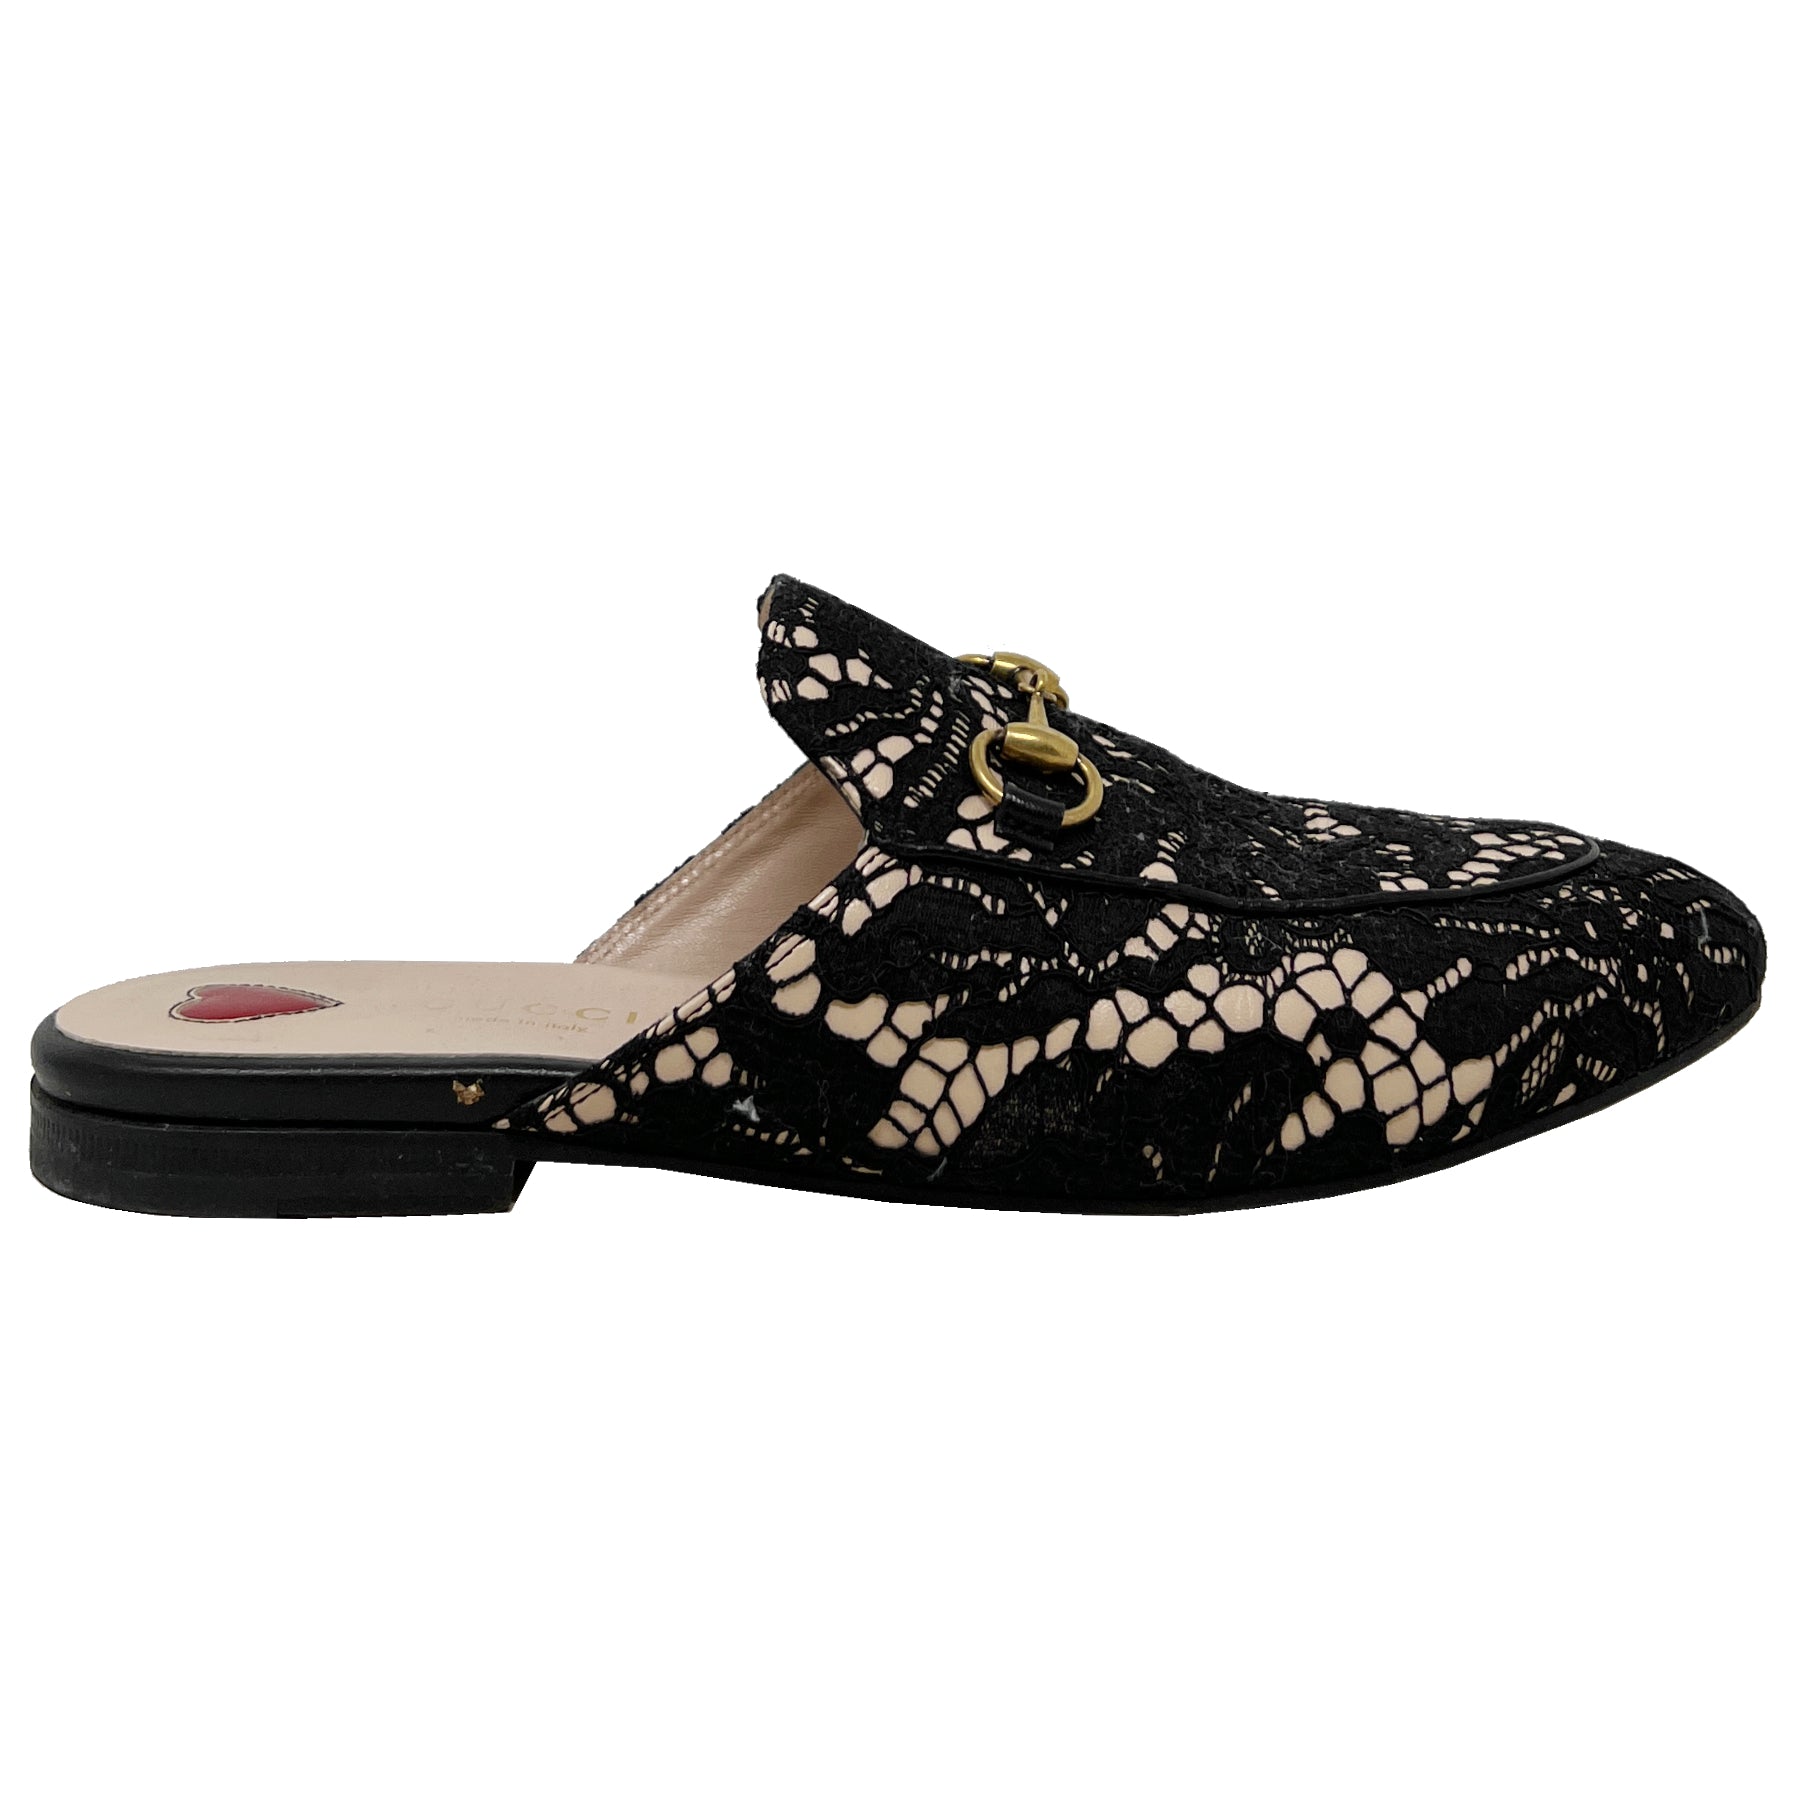 Gucci Princetown Black Lace Overlay Leather Horsebit Loafer Mules